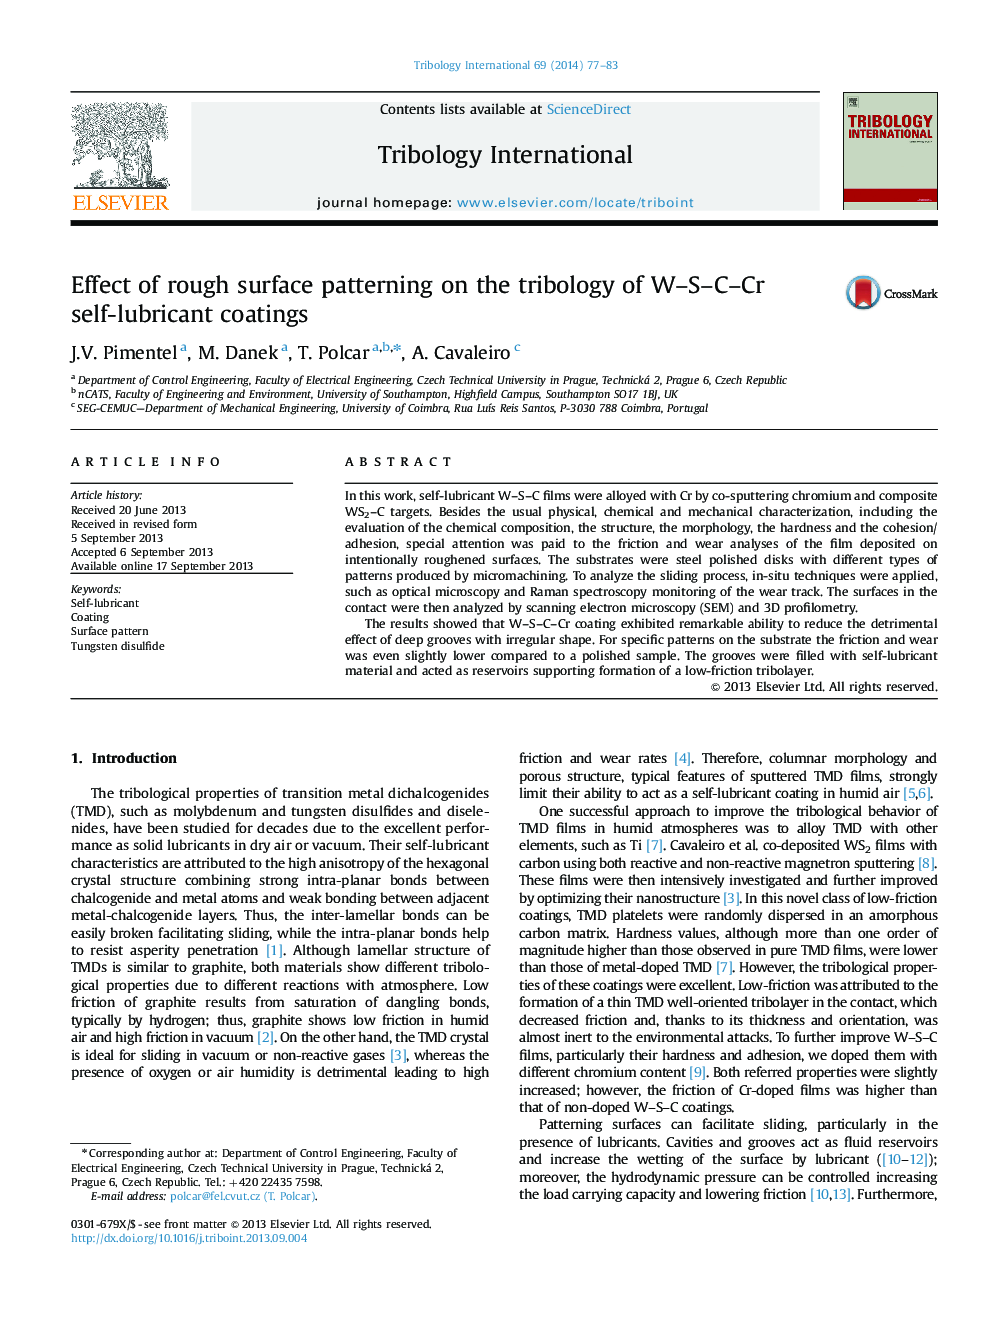 Effect of rough surface patterning on the tribology of W–S–C–Cr self-lubricant coatings